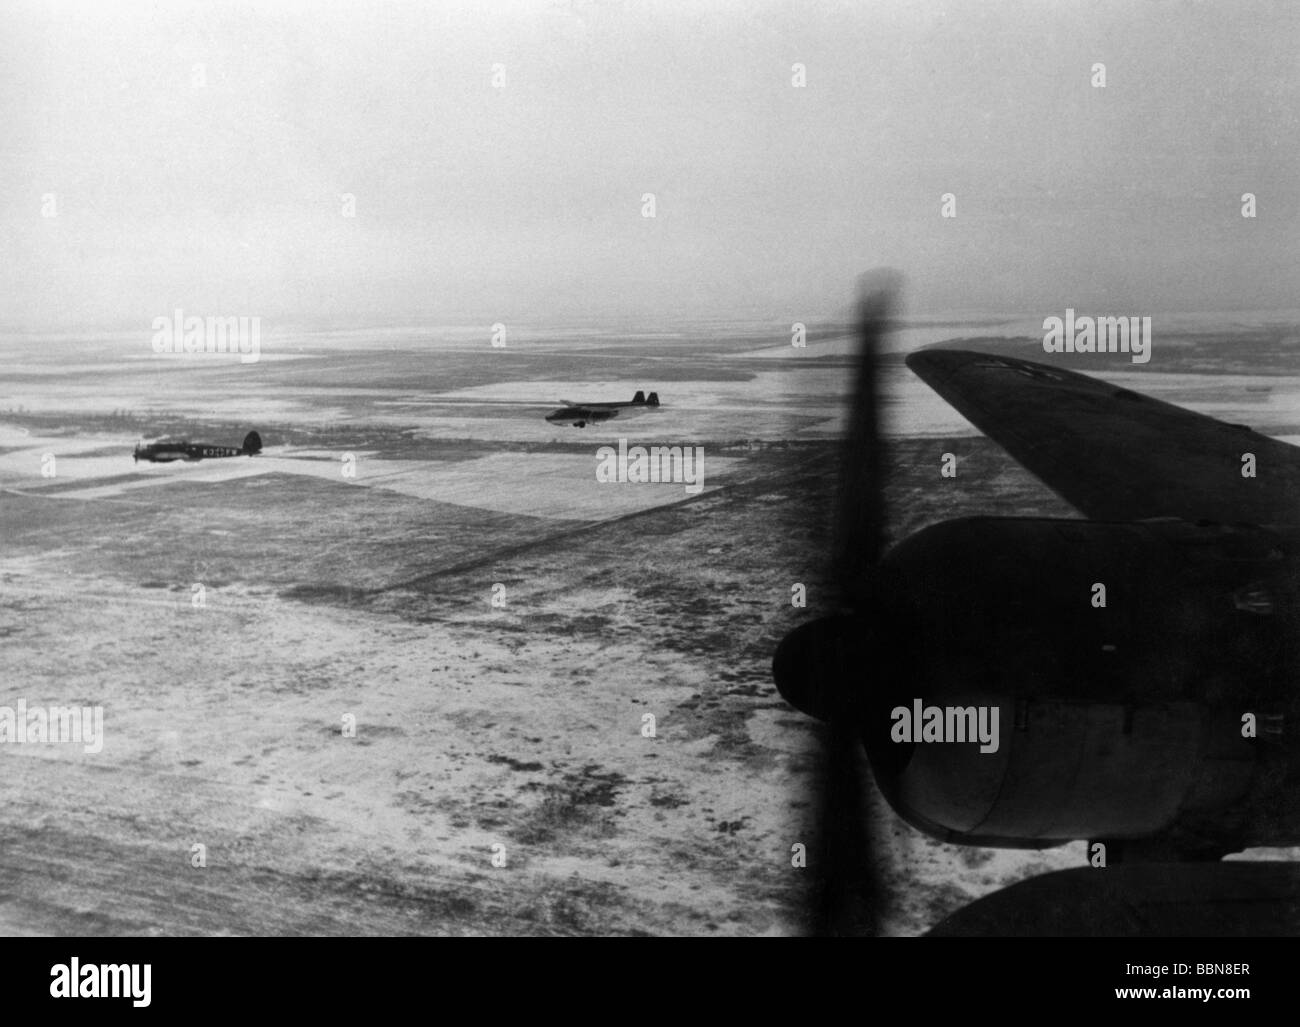 events, Second World War / WWII, Russia, aerial warfare, German bomber pulling a transport glider Gotha Go 242, view from the cockpit of a Focke-Wulf Fw 200 'Condor', near Stalino, Ukraine, 11.2.1943, Stock Photo